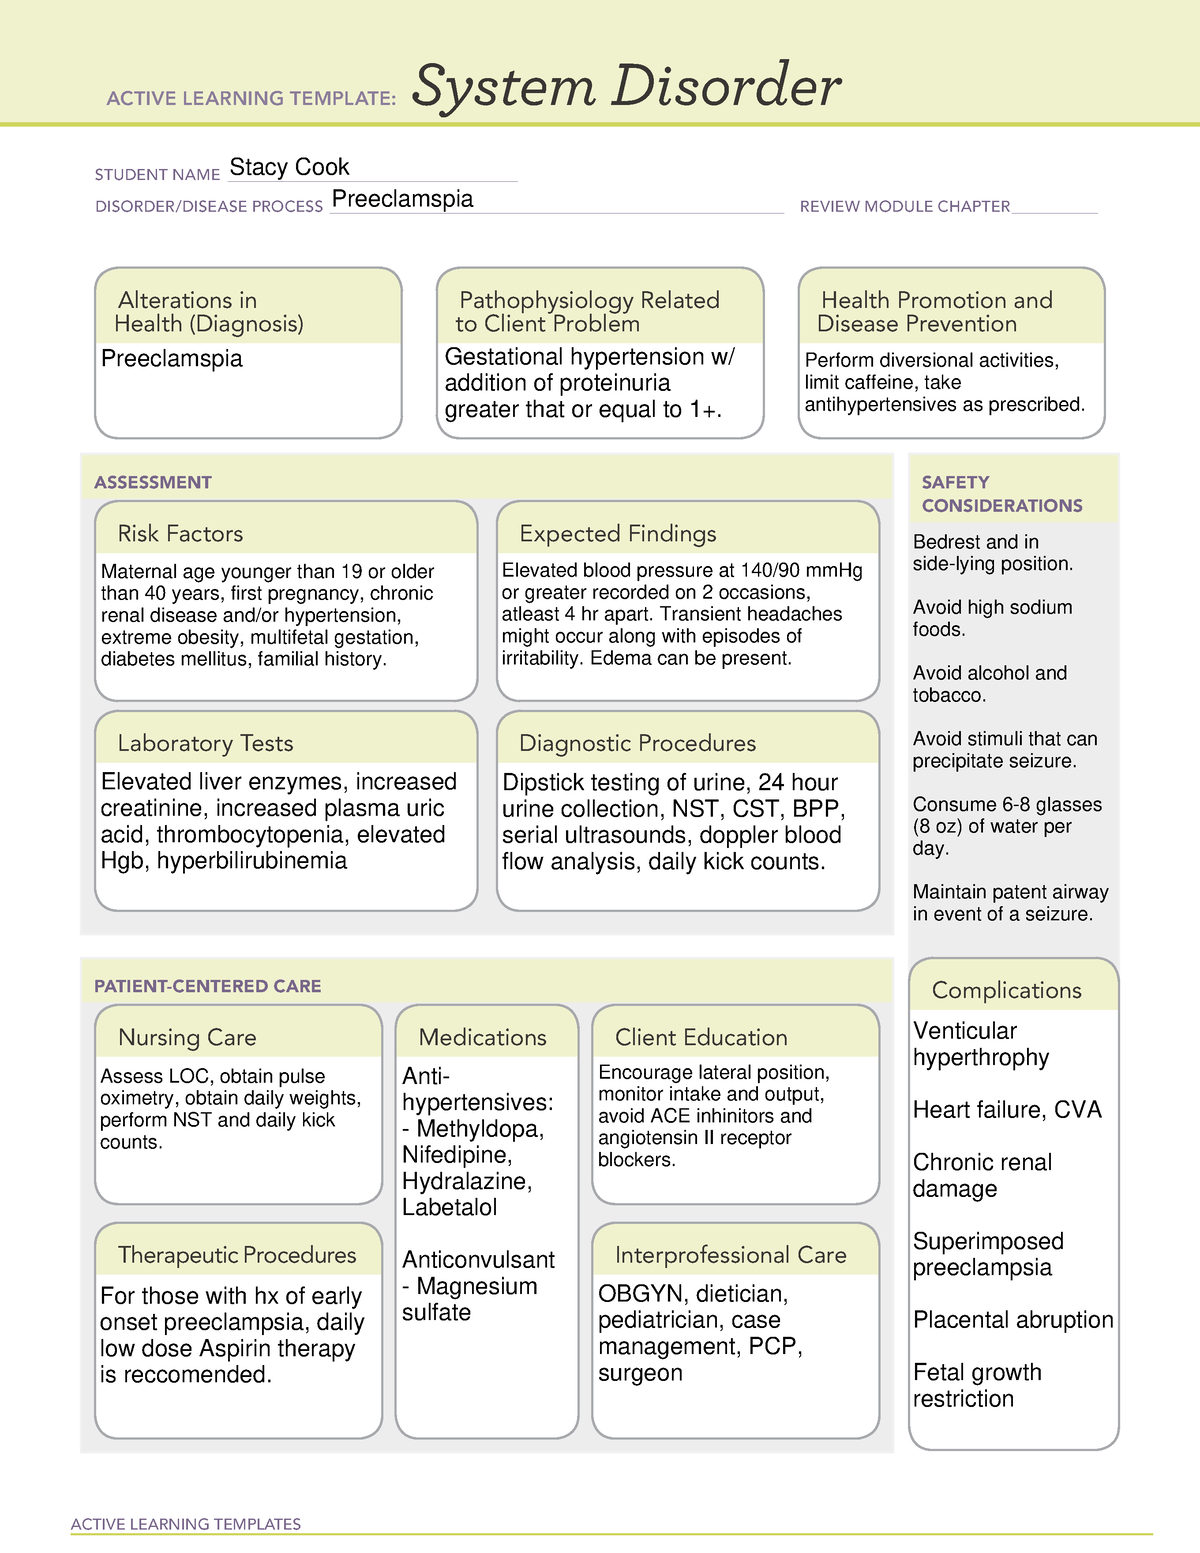 ATI System Disorder Preeclampsia ACTIVE LEARNING TEMPLATES System